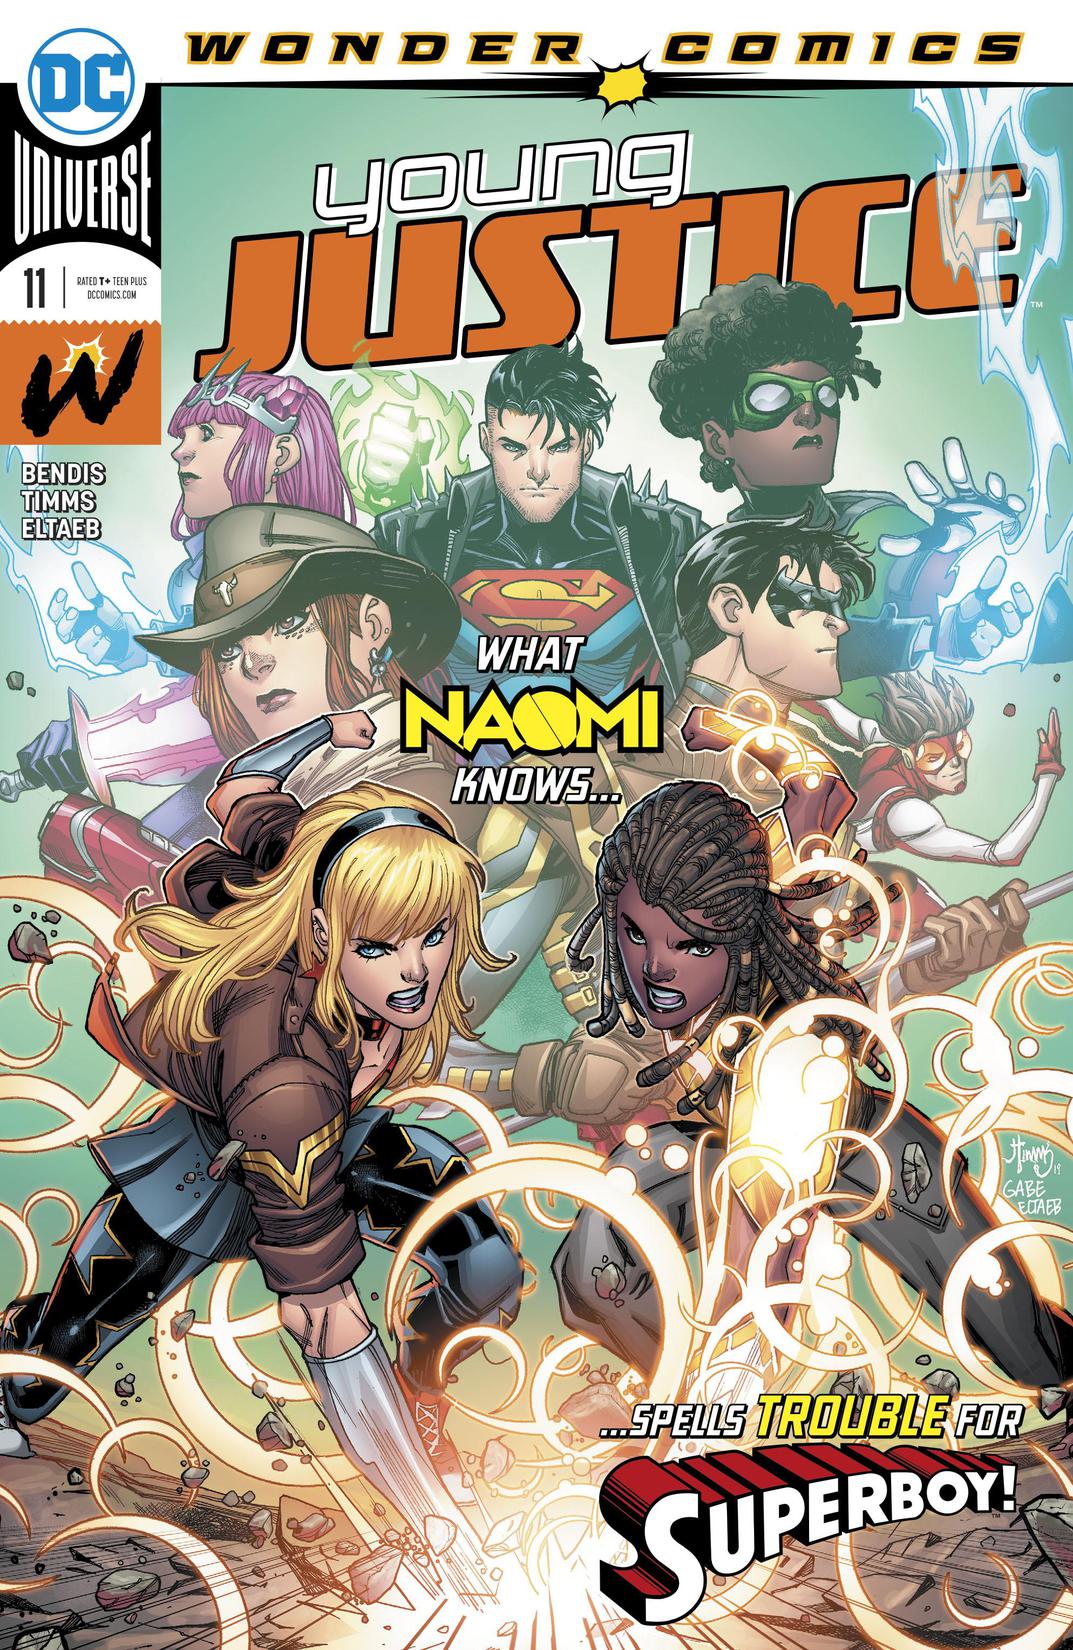 Young Justice (2019-) #11 preview images